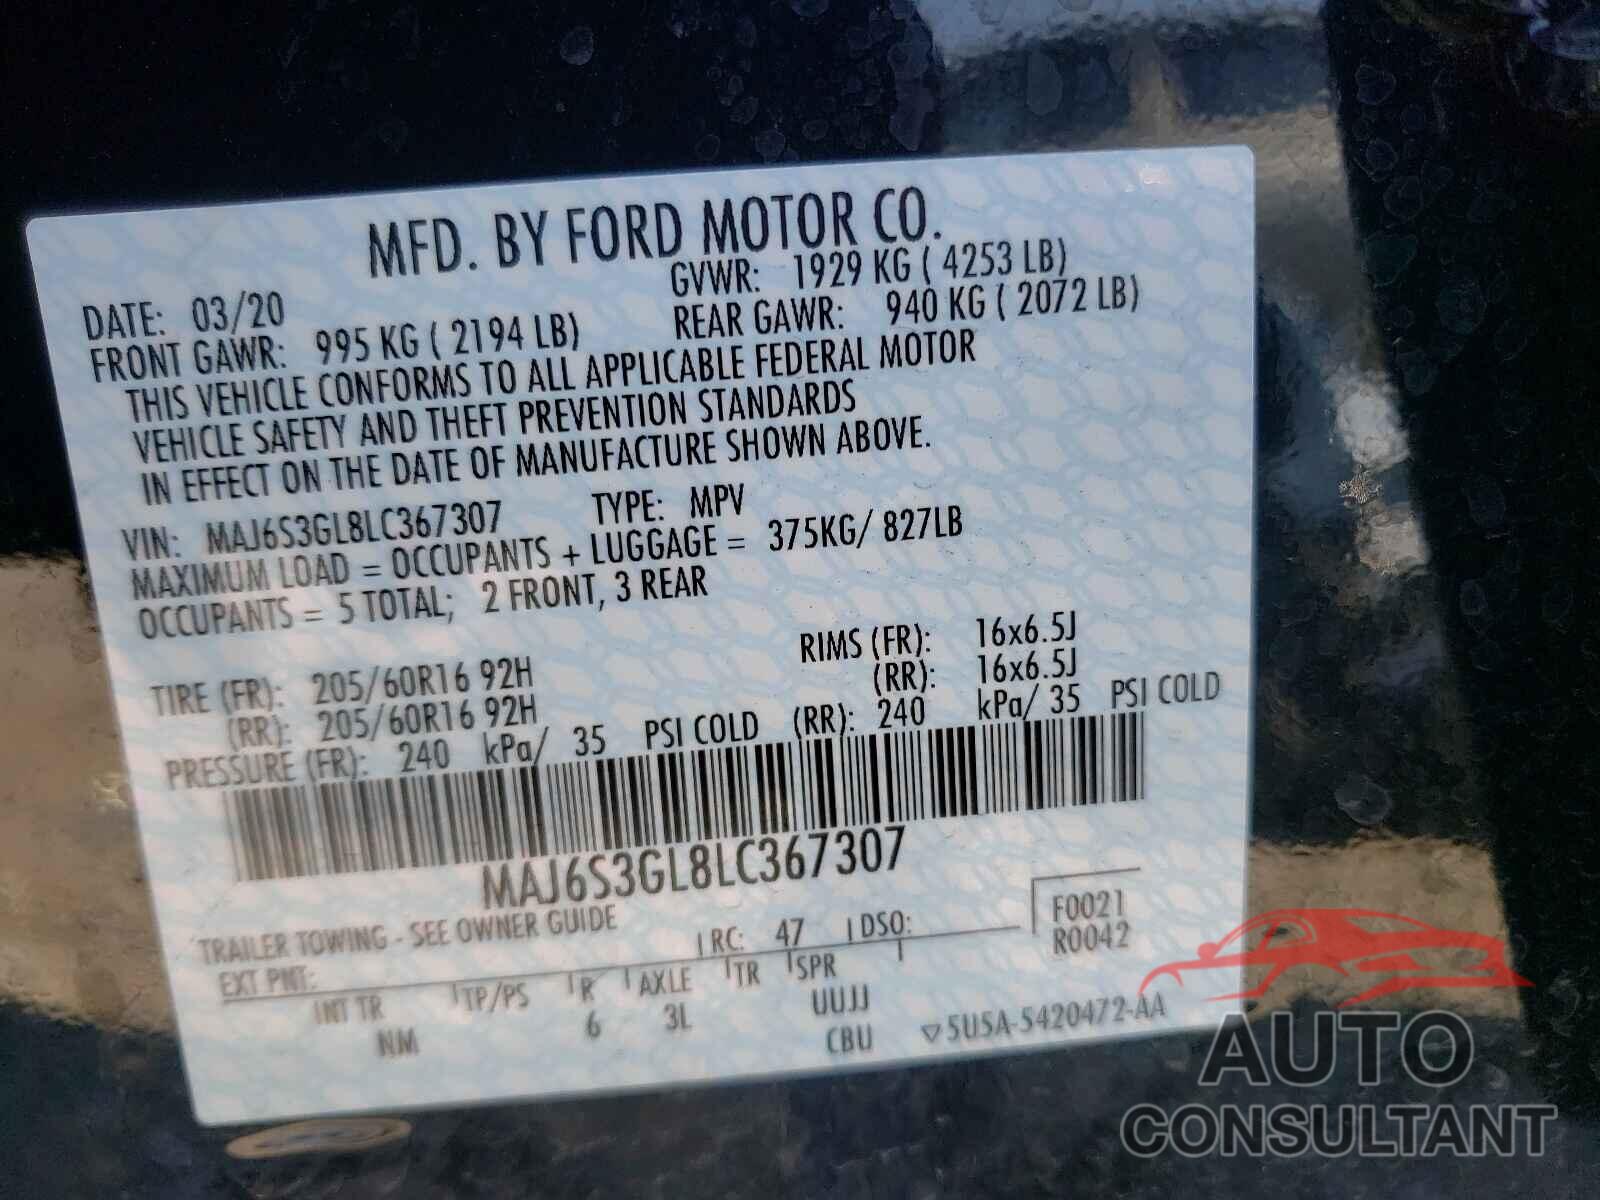 FORD ALL OTHER 2020 - MAJ6S3GL8LC367307